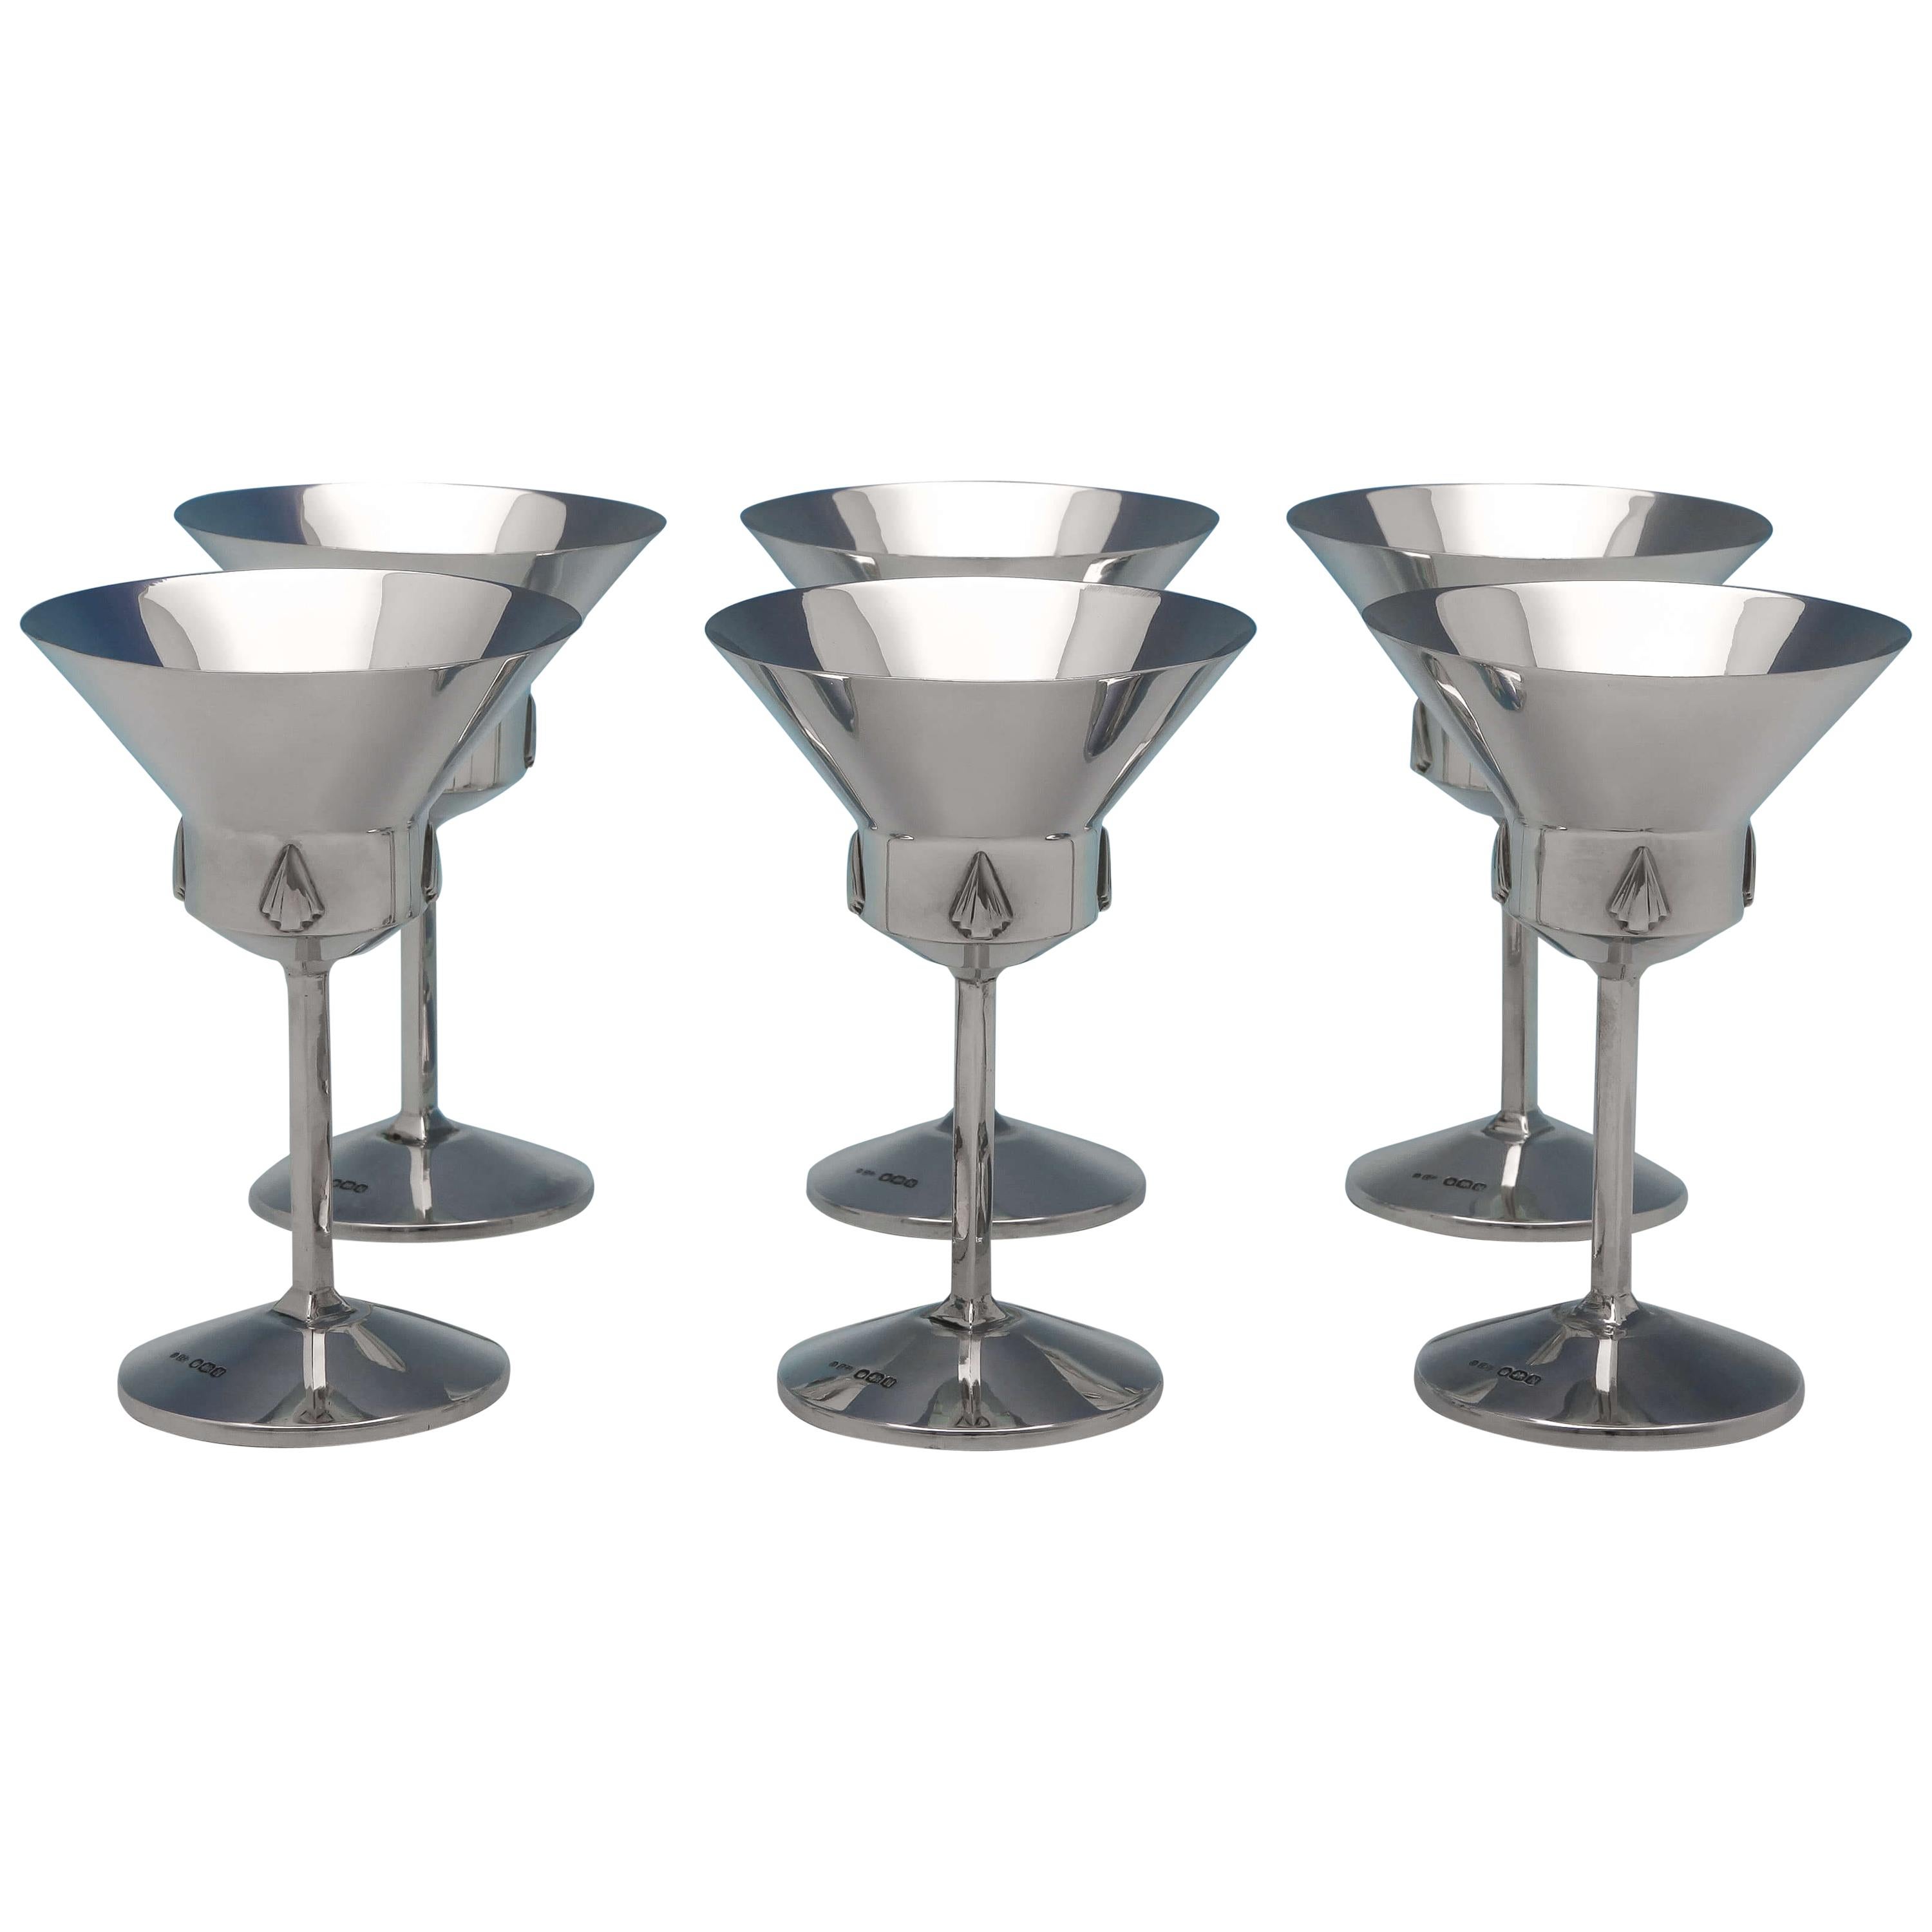 Art Deco Design Sterling Silver Set of 6 Cocktail Glasses from 1955